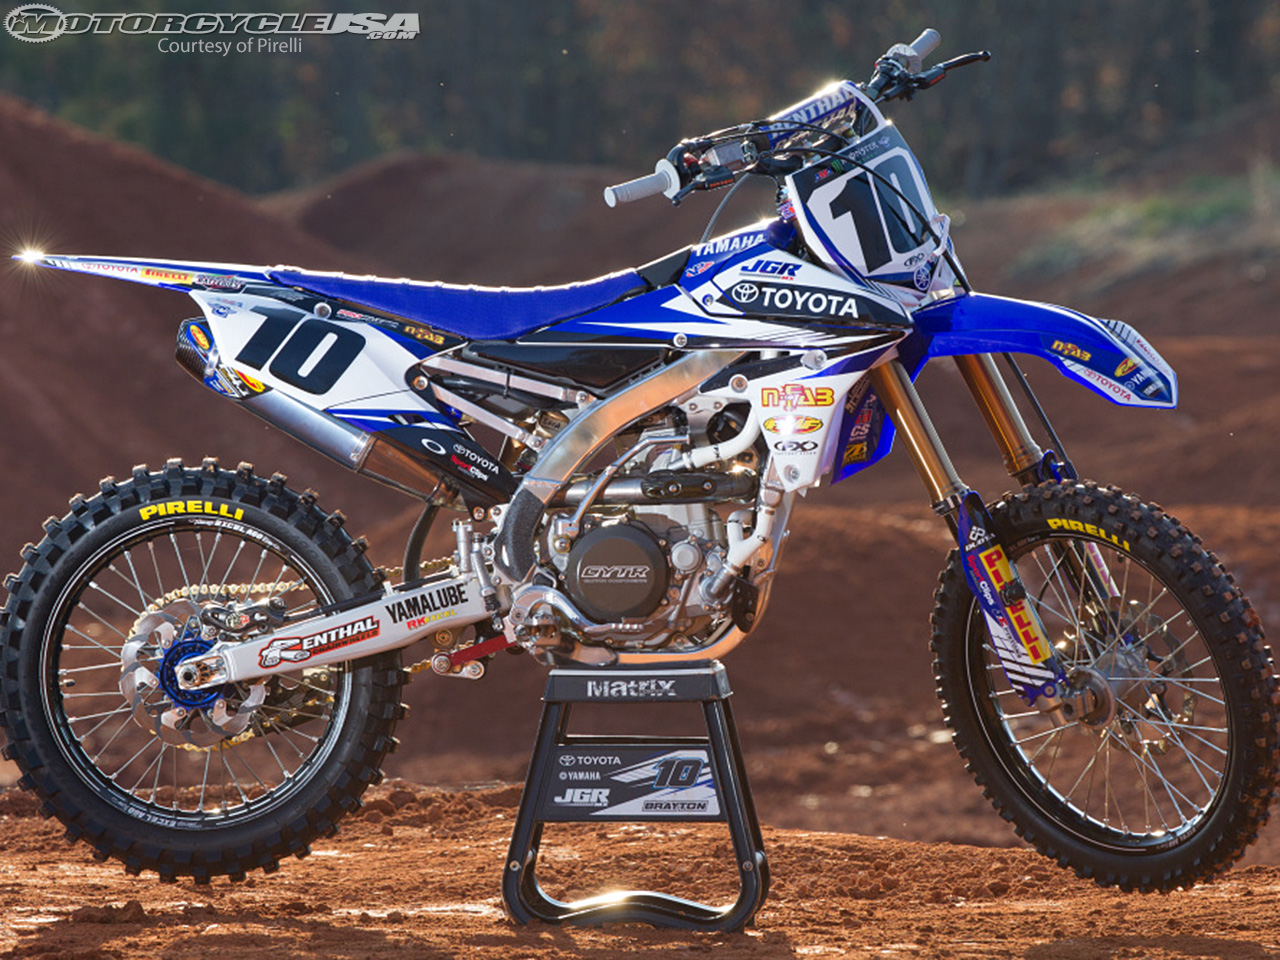 Supercross Series From Through Pirelli Will Also Be The